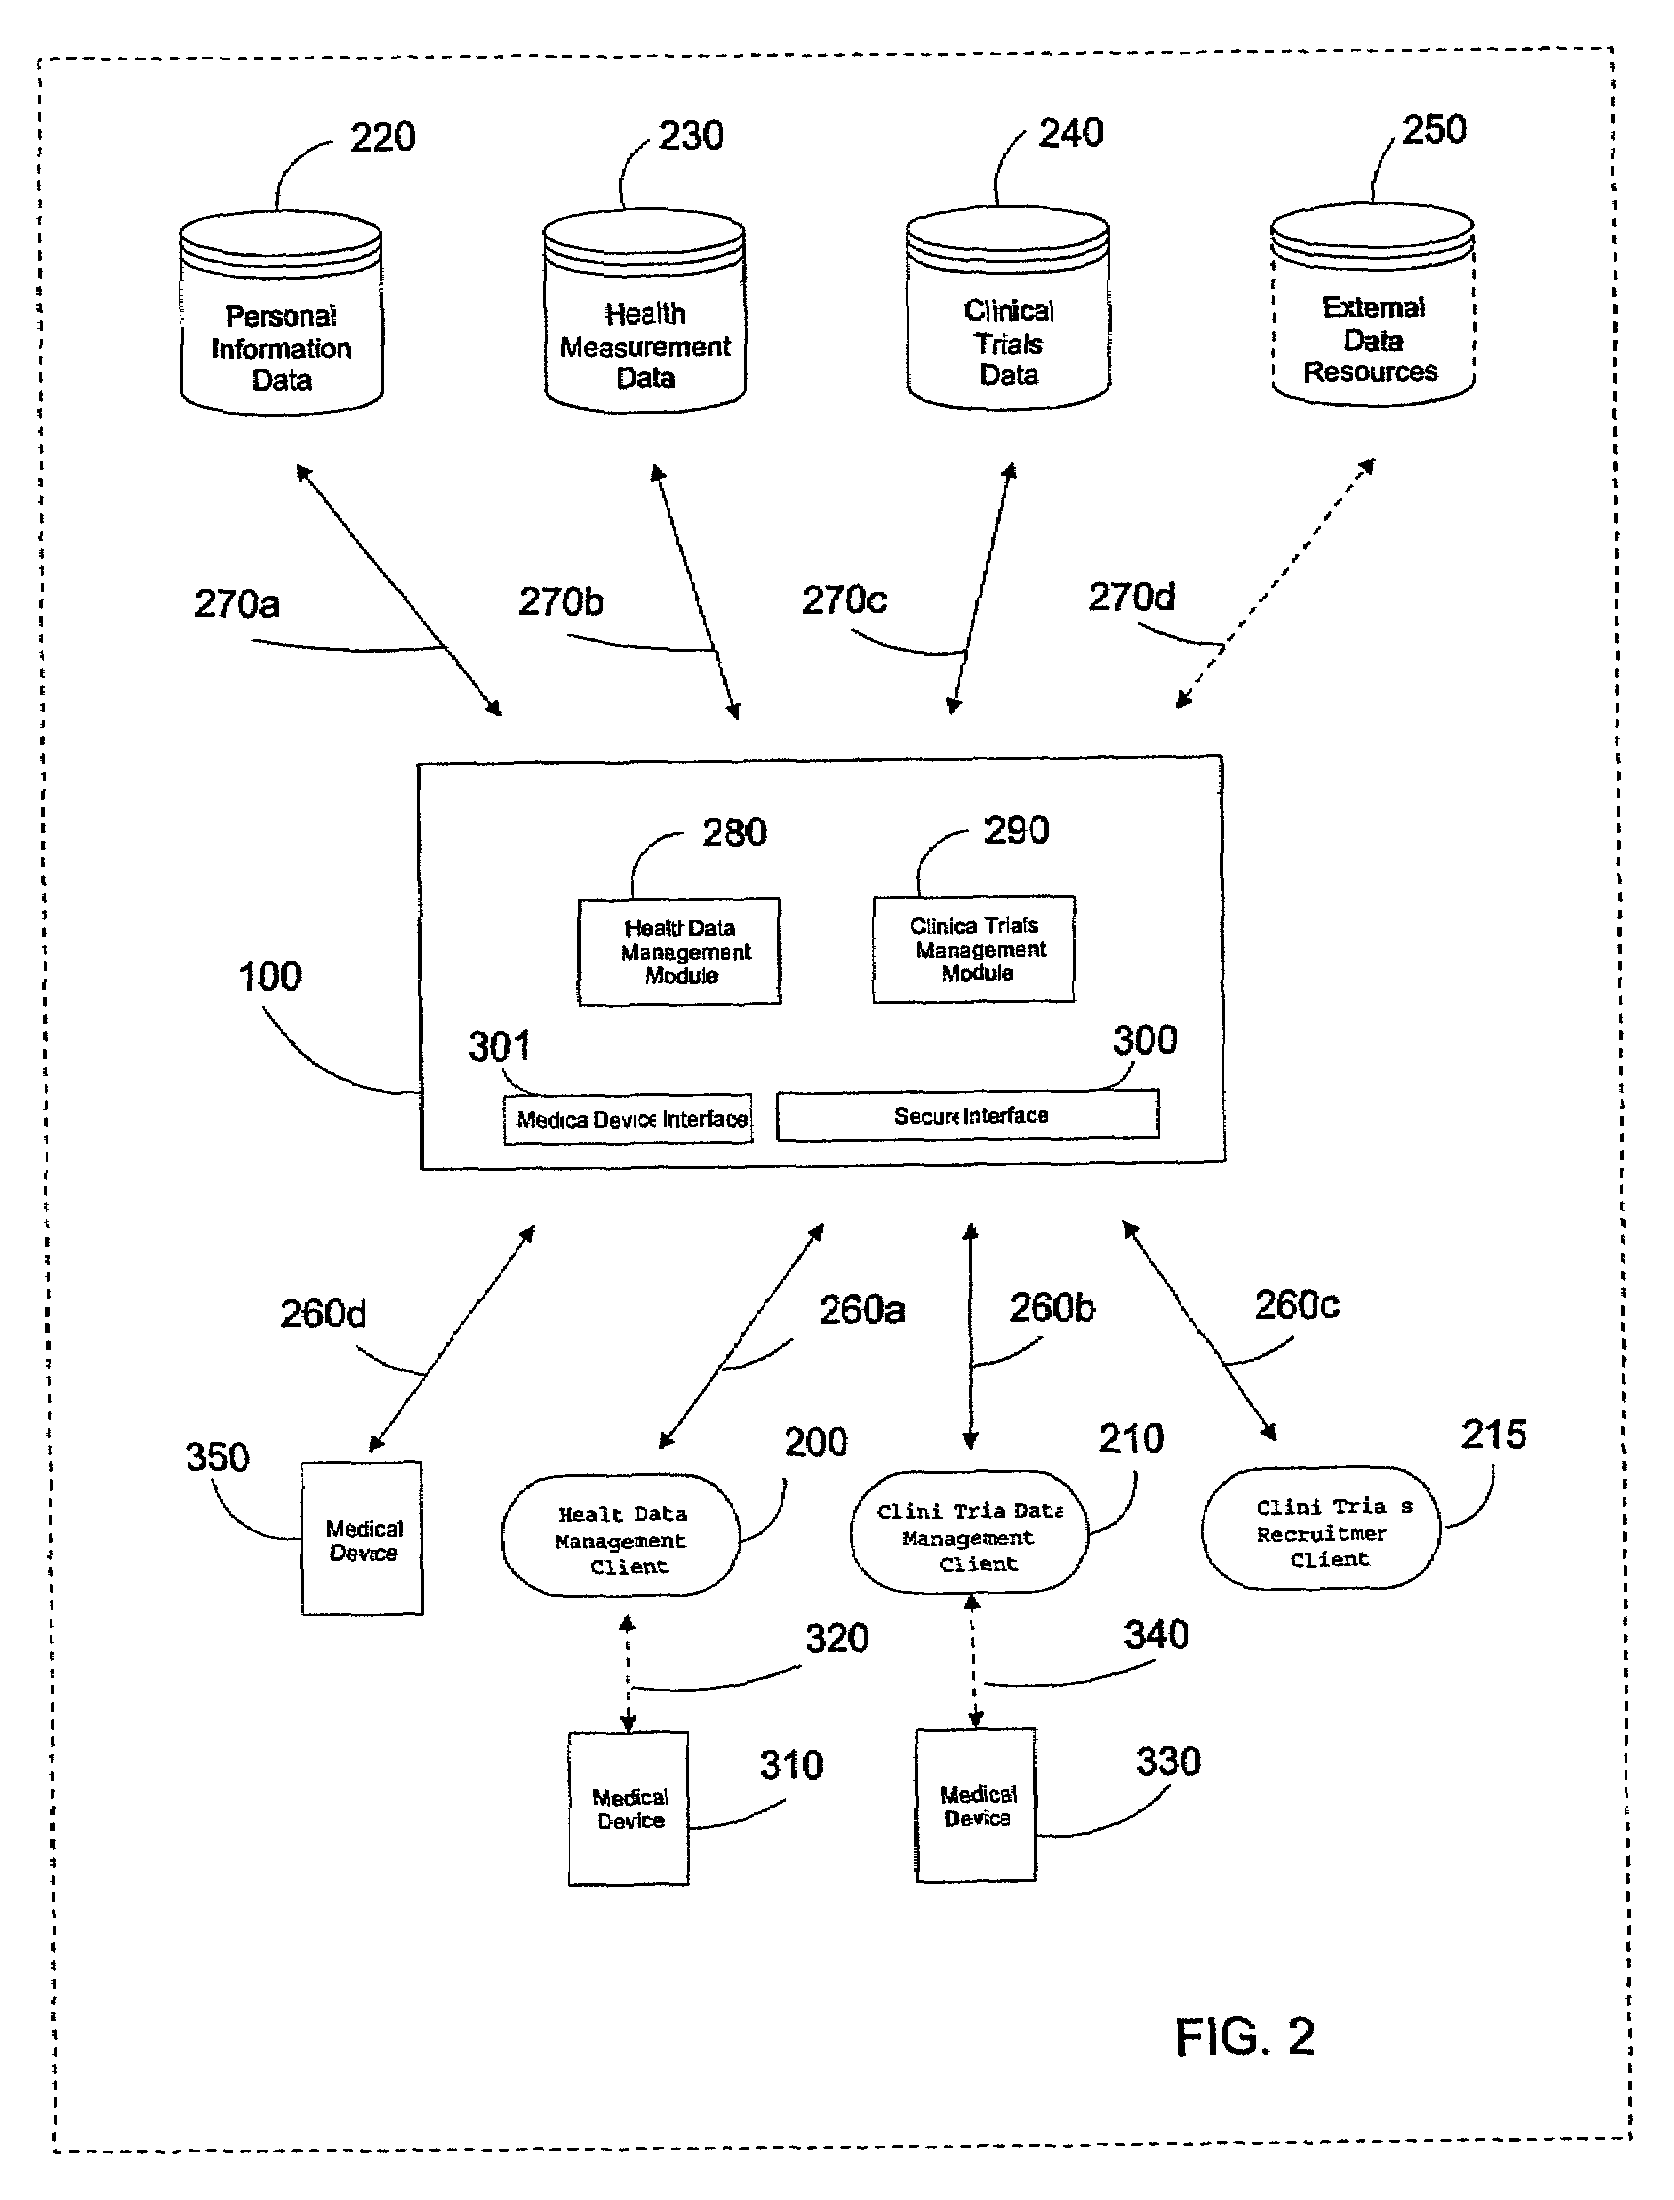 System and method for managing, manipulating, and analyzing data and devices over a distributed network